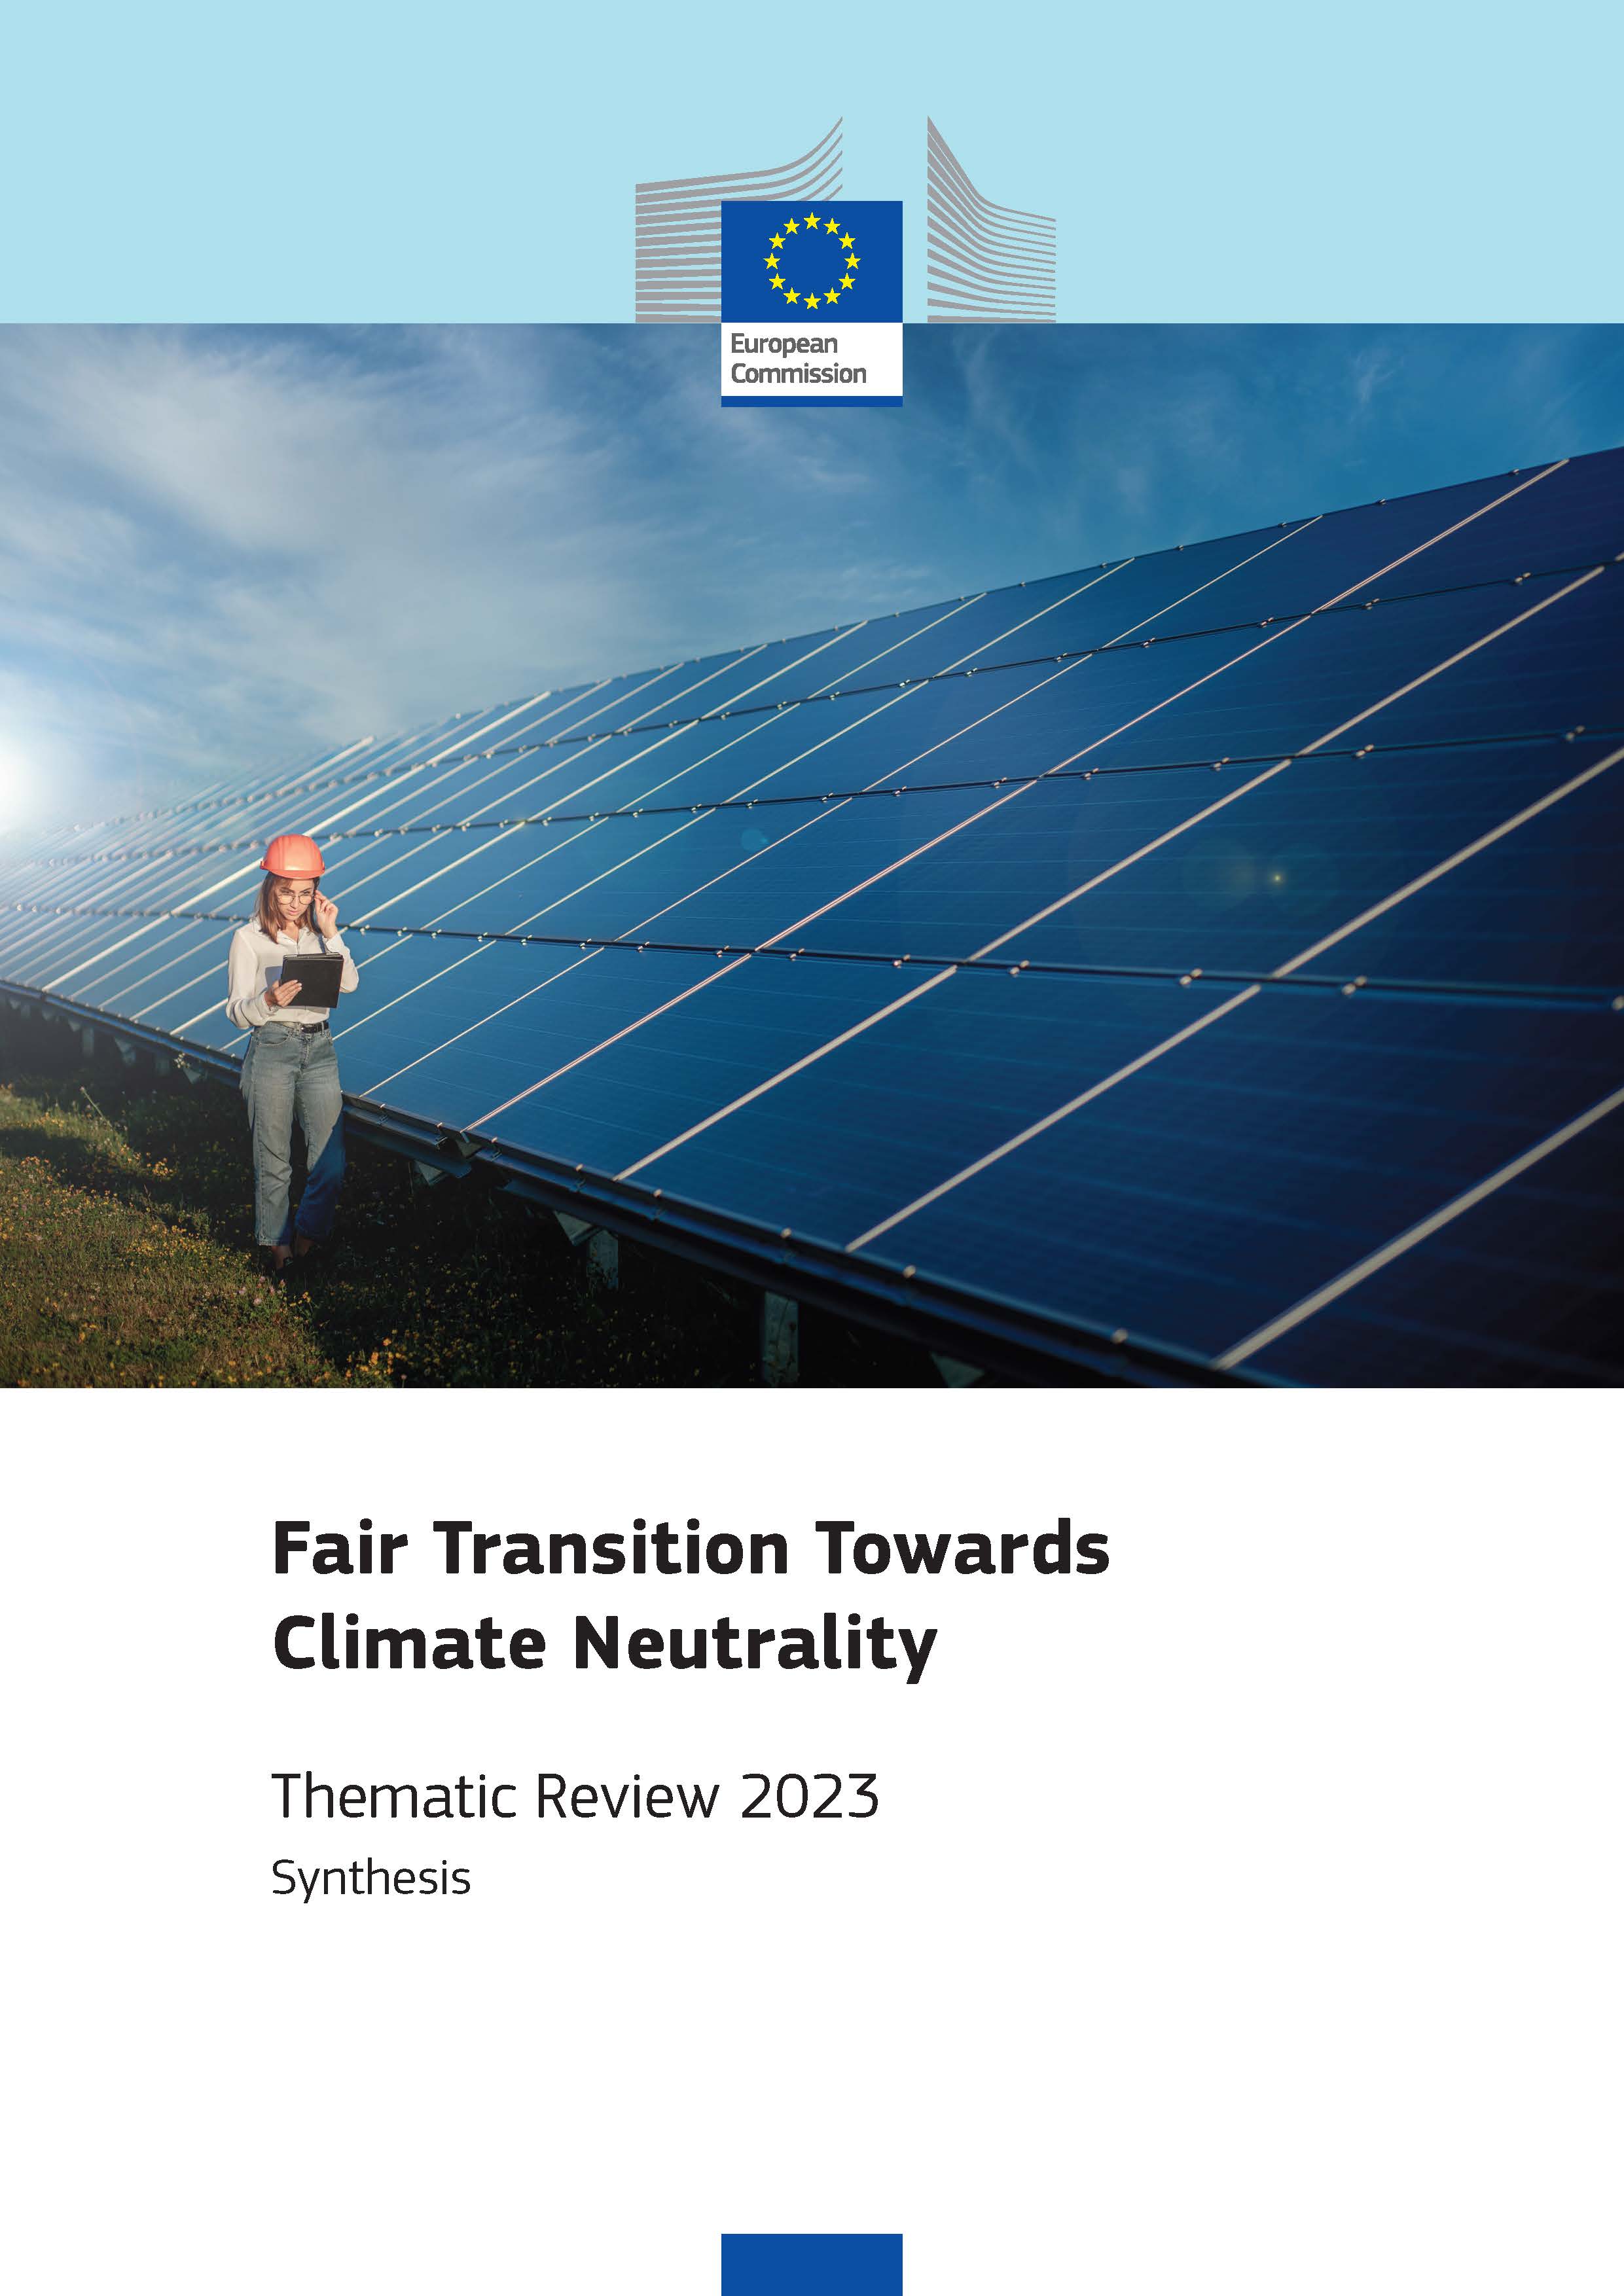 Thematic Review 2023: Fair Transition Towards Climate Neutrality